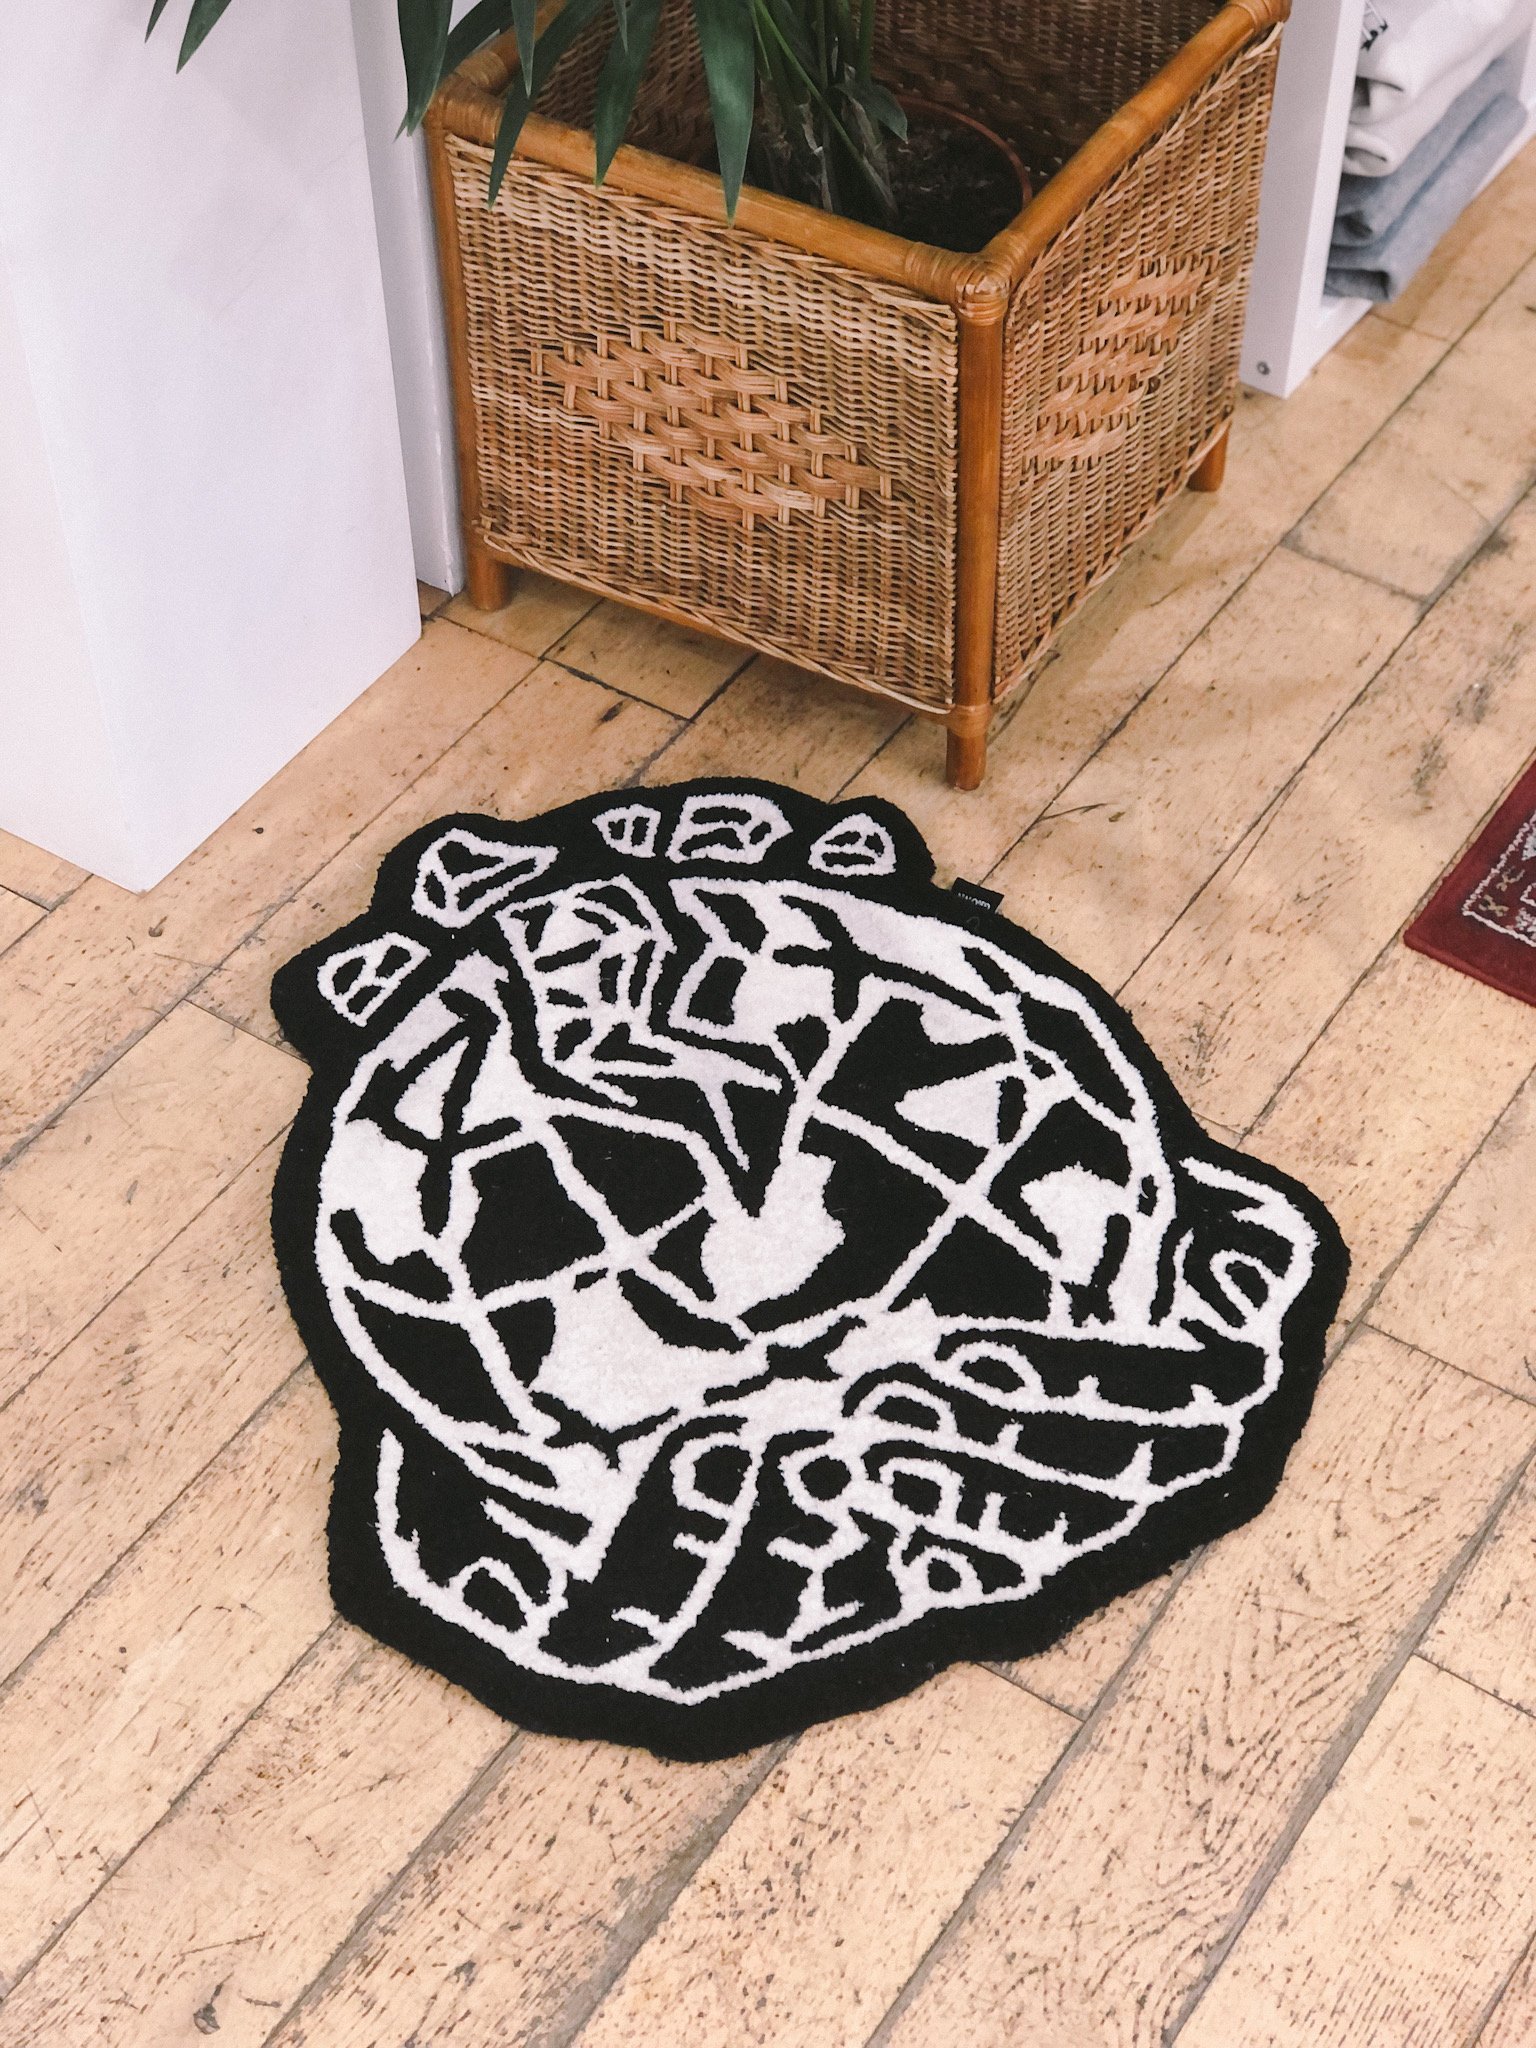 https://assets.bigcartel.com/product_images/2584c371-2d38-4f2f-a84f-51ffd3f67153/earth-hand-tufted-rugs.jpg?auto=format&fit=max&w=2000